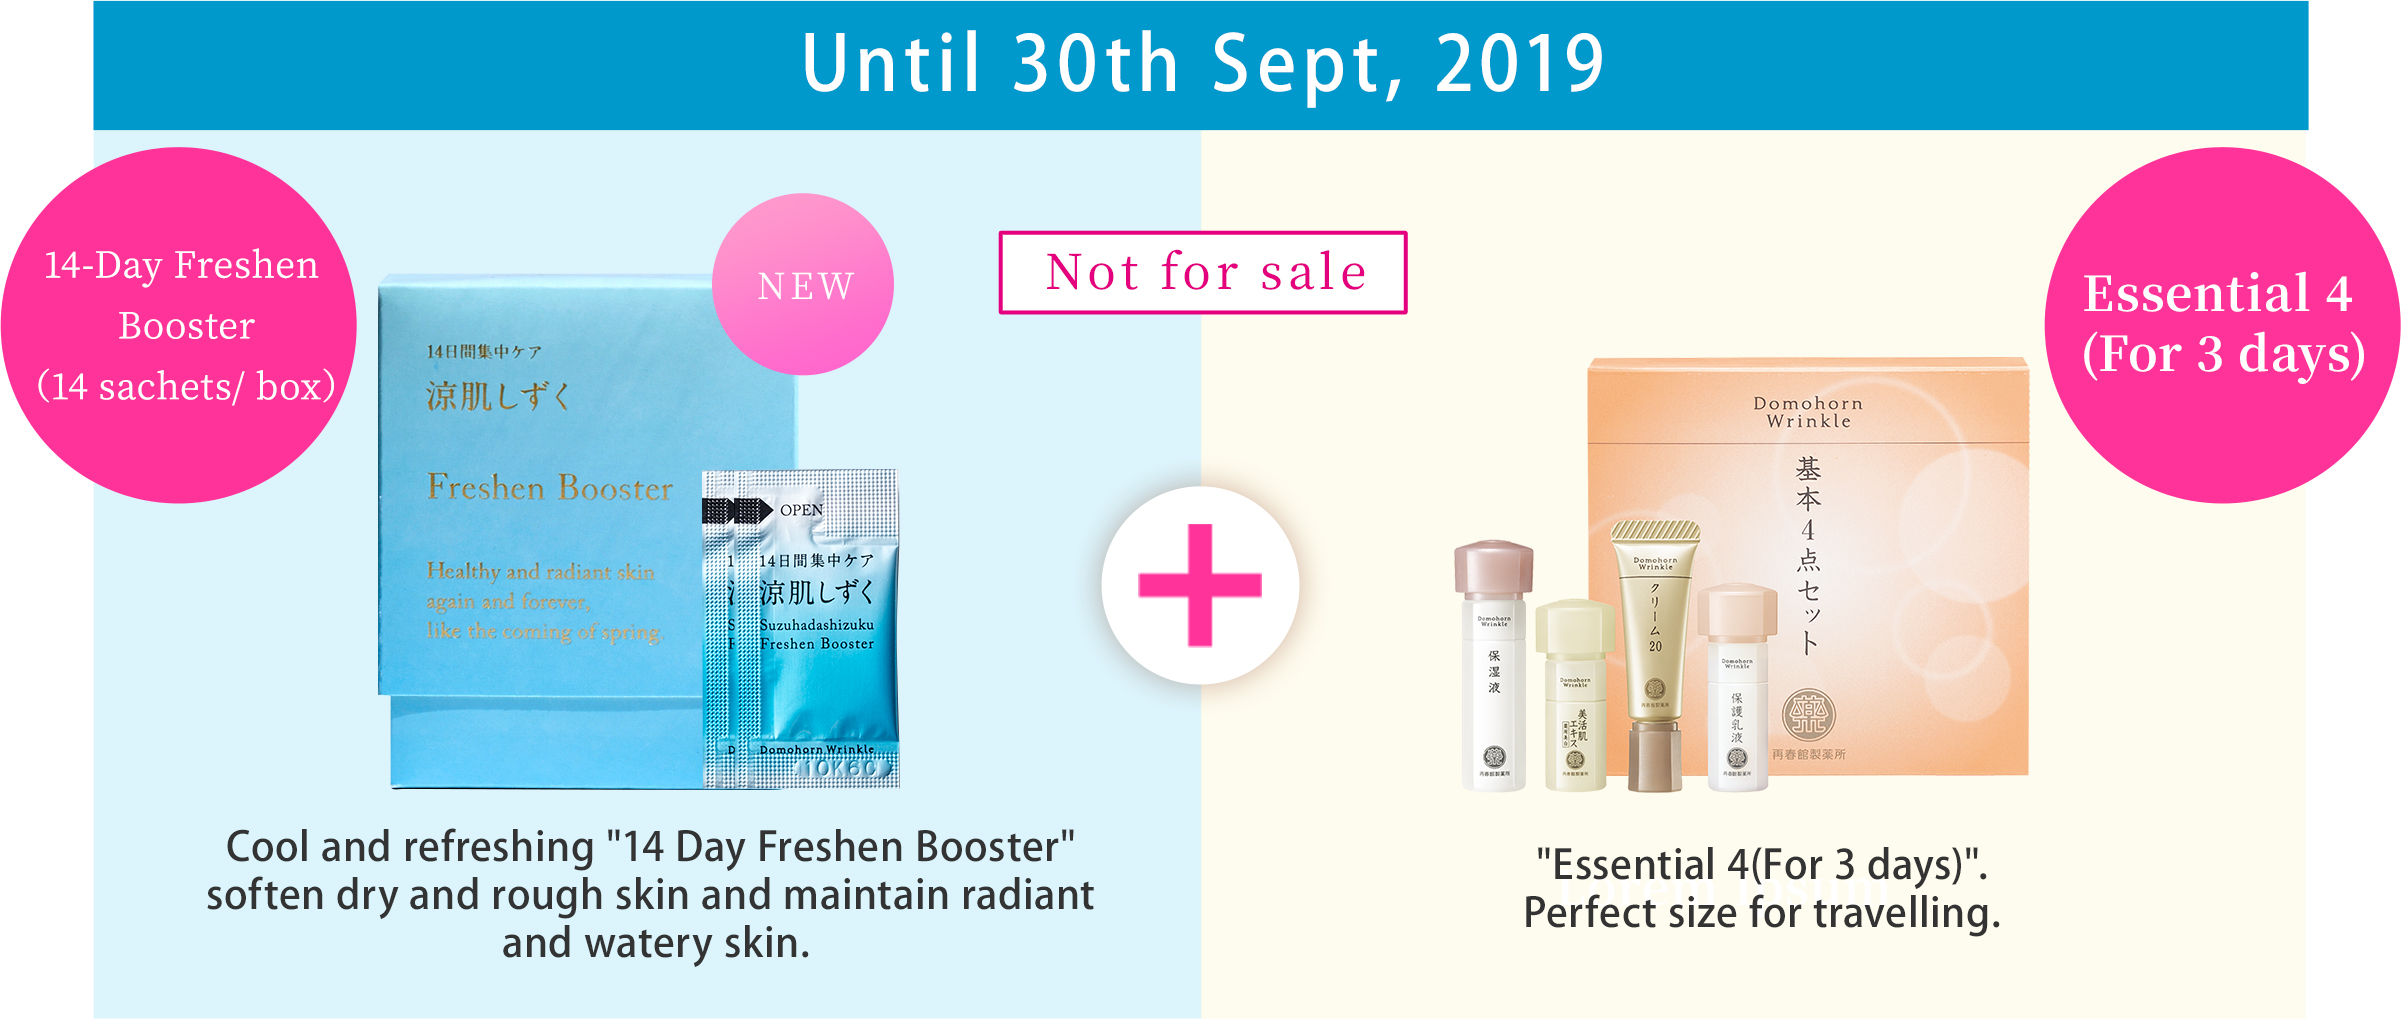 Until 30th Sept, 2019 14-Day Freshen Booster （14 sachets/ box）Cool and refreshing 